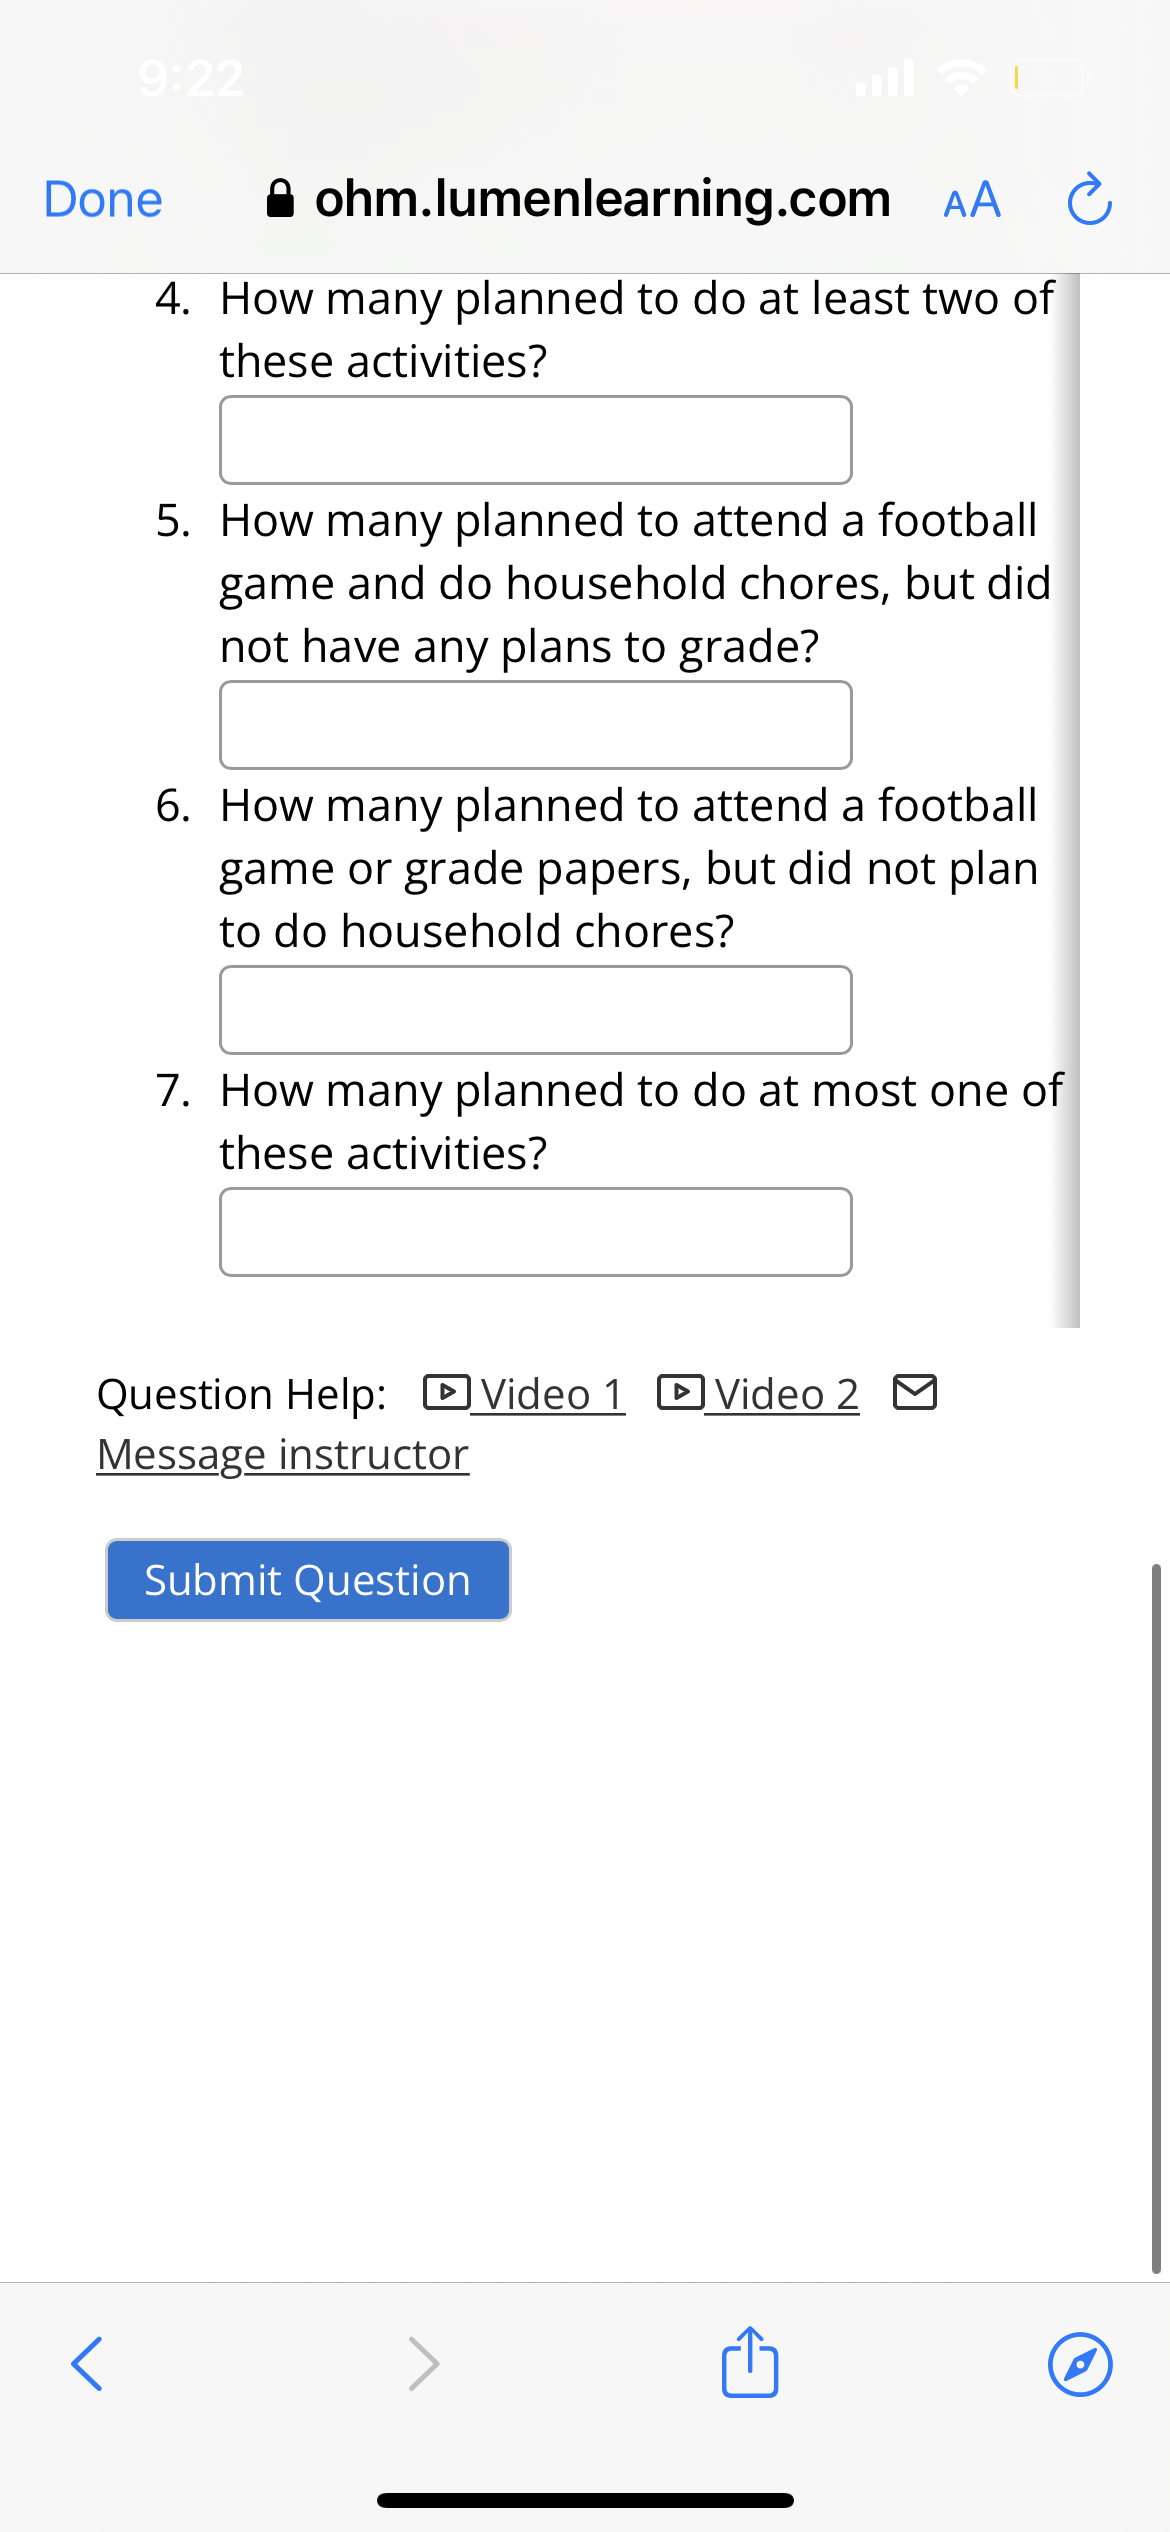 9:22
Done
ohm.lumenlearning.com AA C
4. How many planned to do at least two of
these activities?
<
5. How many planned to attend a football
game and do household chores, but did
not have any plans to grade?
6. How many planned to attend a football
game or grade papers, but did not plan
to do household chores?
7. How many planned to do at most one of
these activities?
Question Help: Video 1 Video 2
Message instructor
Submit Question